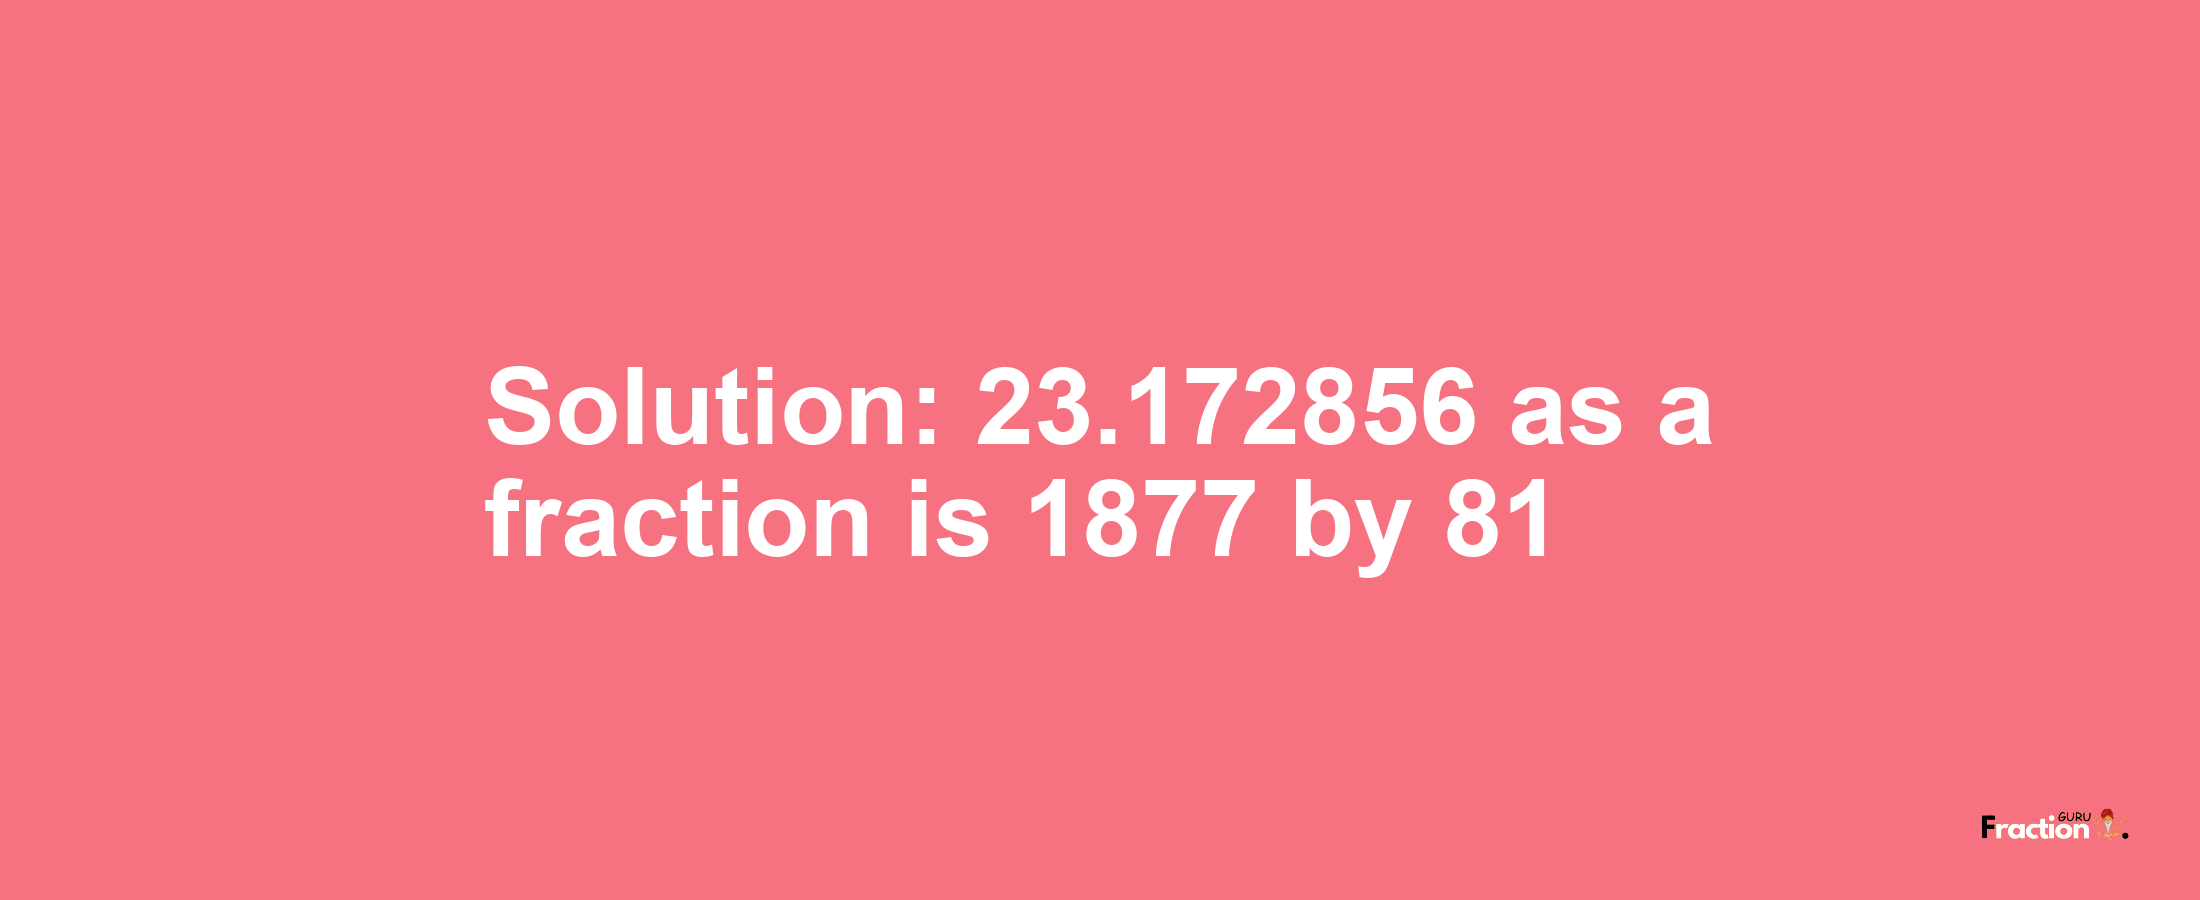 Solution:23.172856 as a fraction is 1877/81